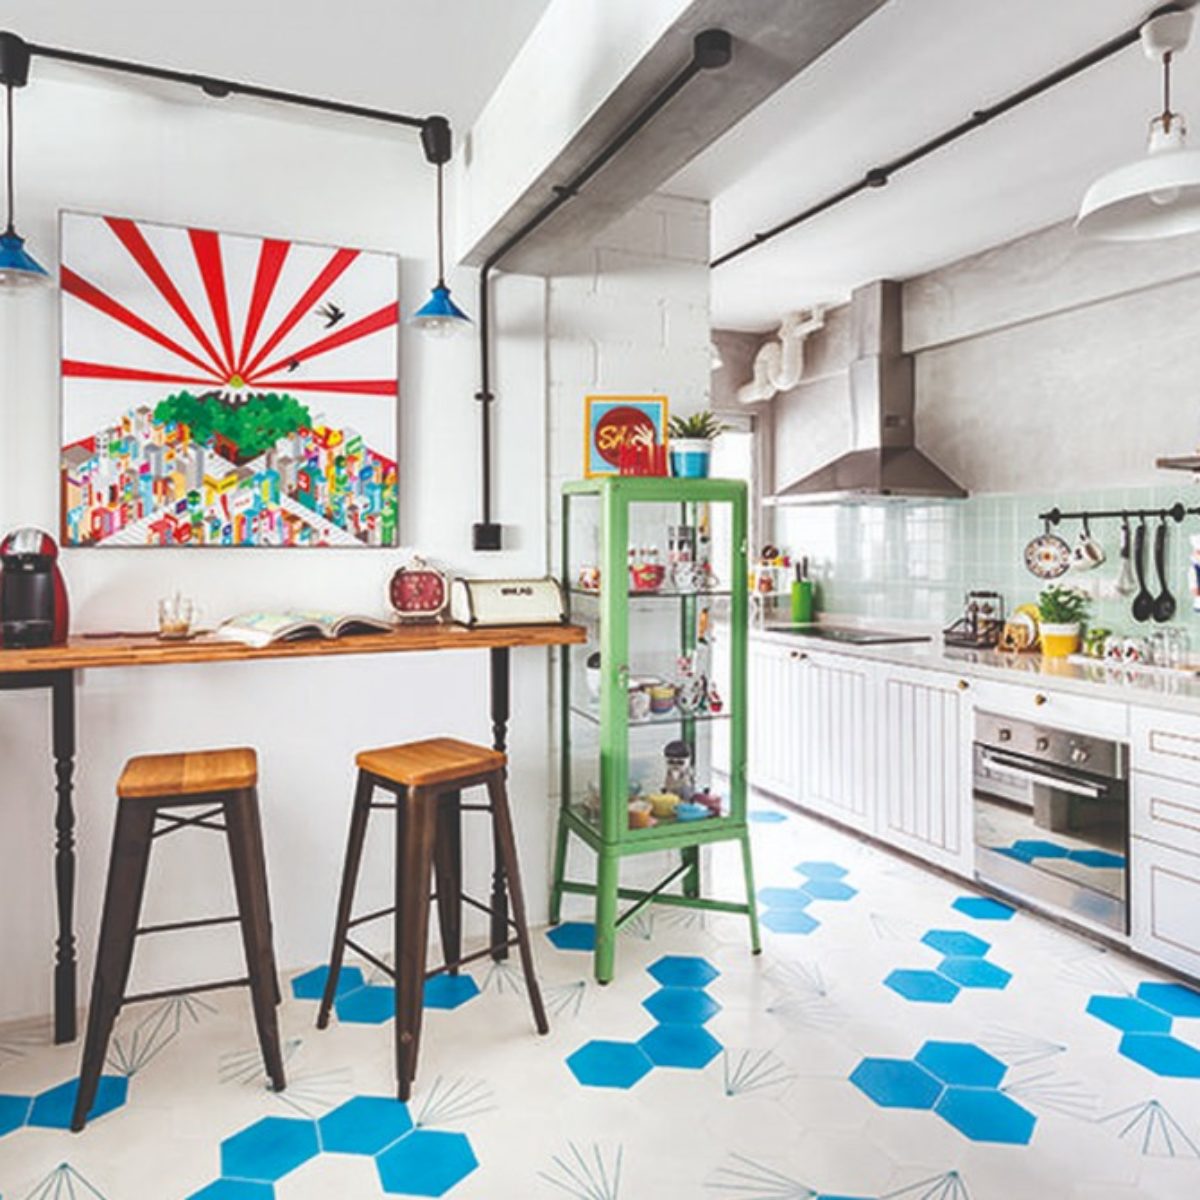 9 Hdb Kitchen Designs In Singapore That Are Magazine Cover Worthy